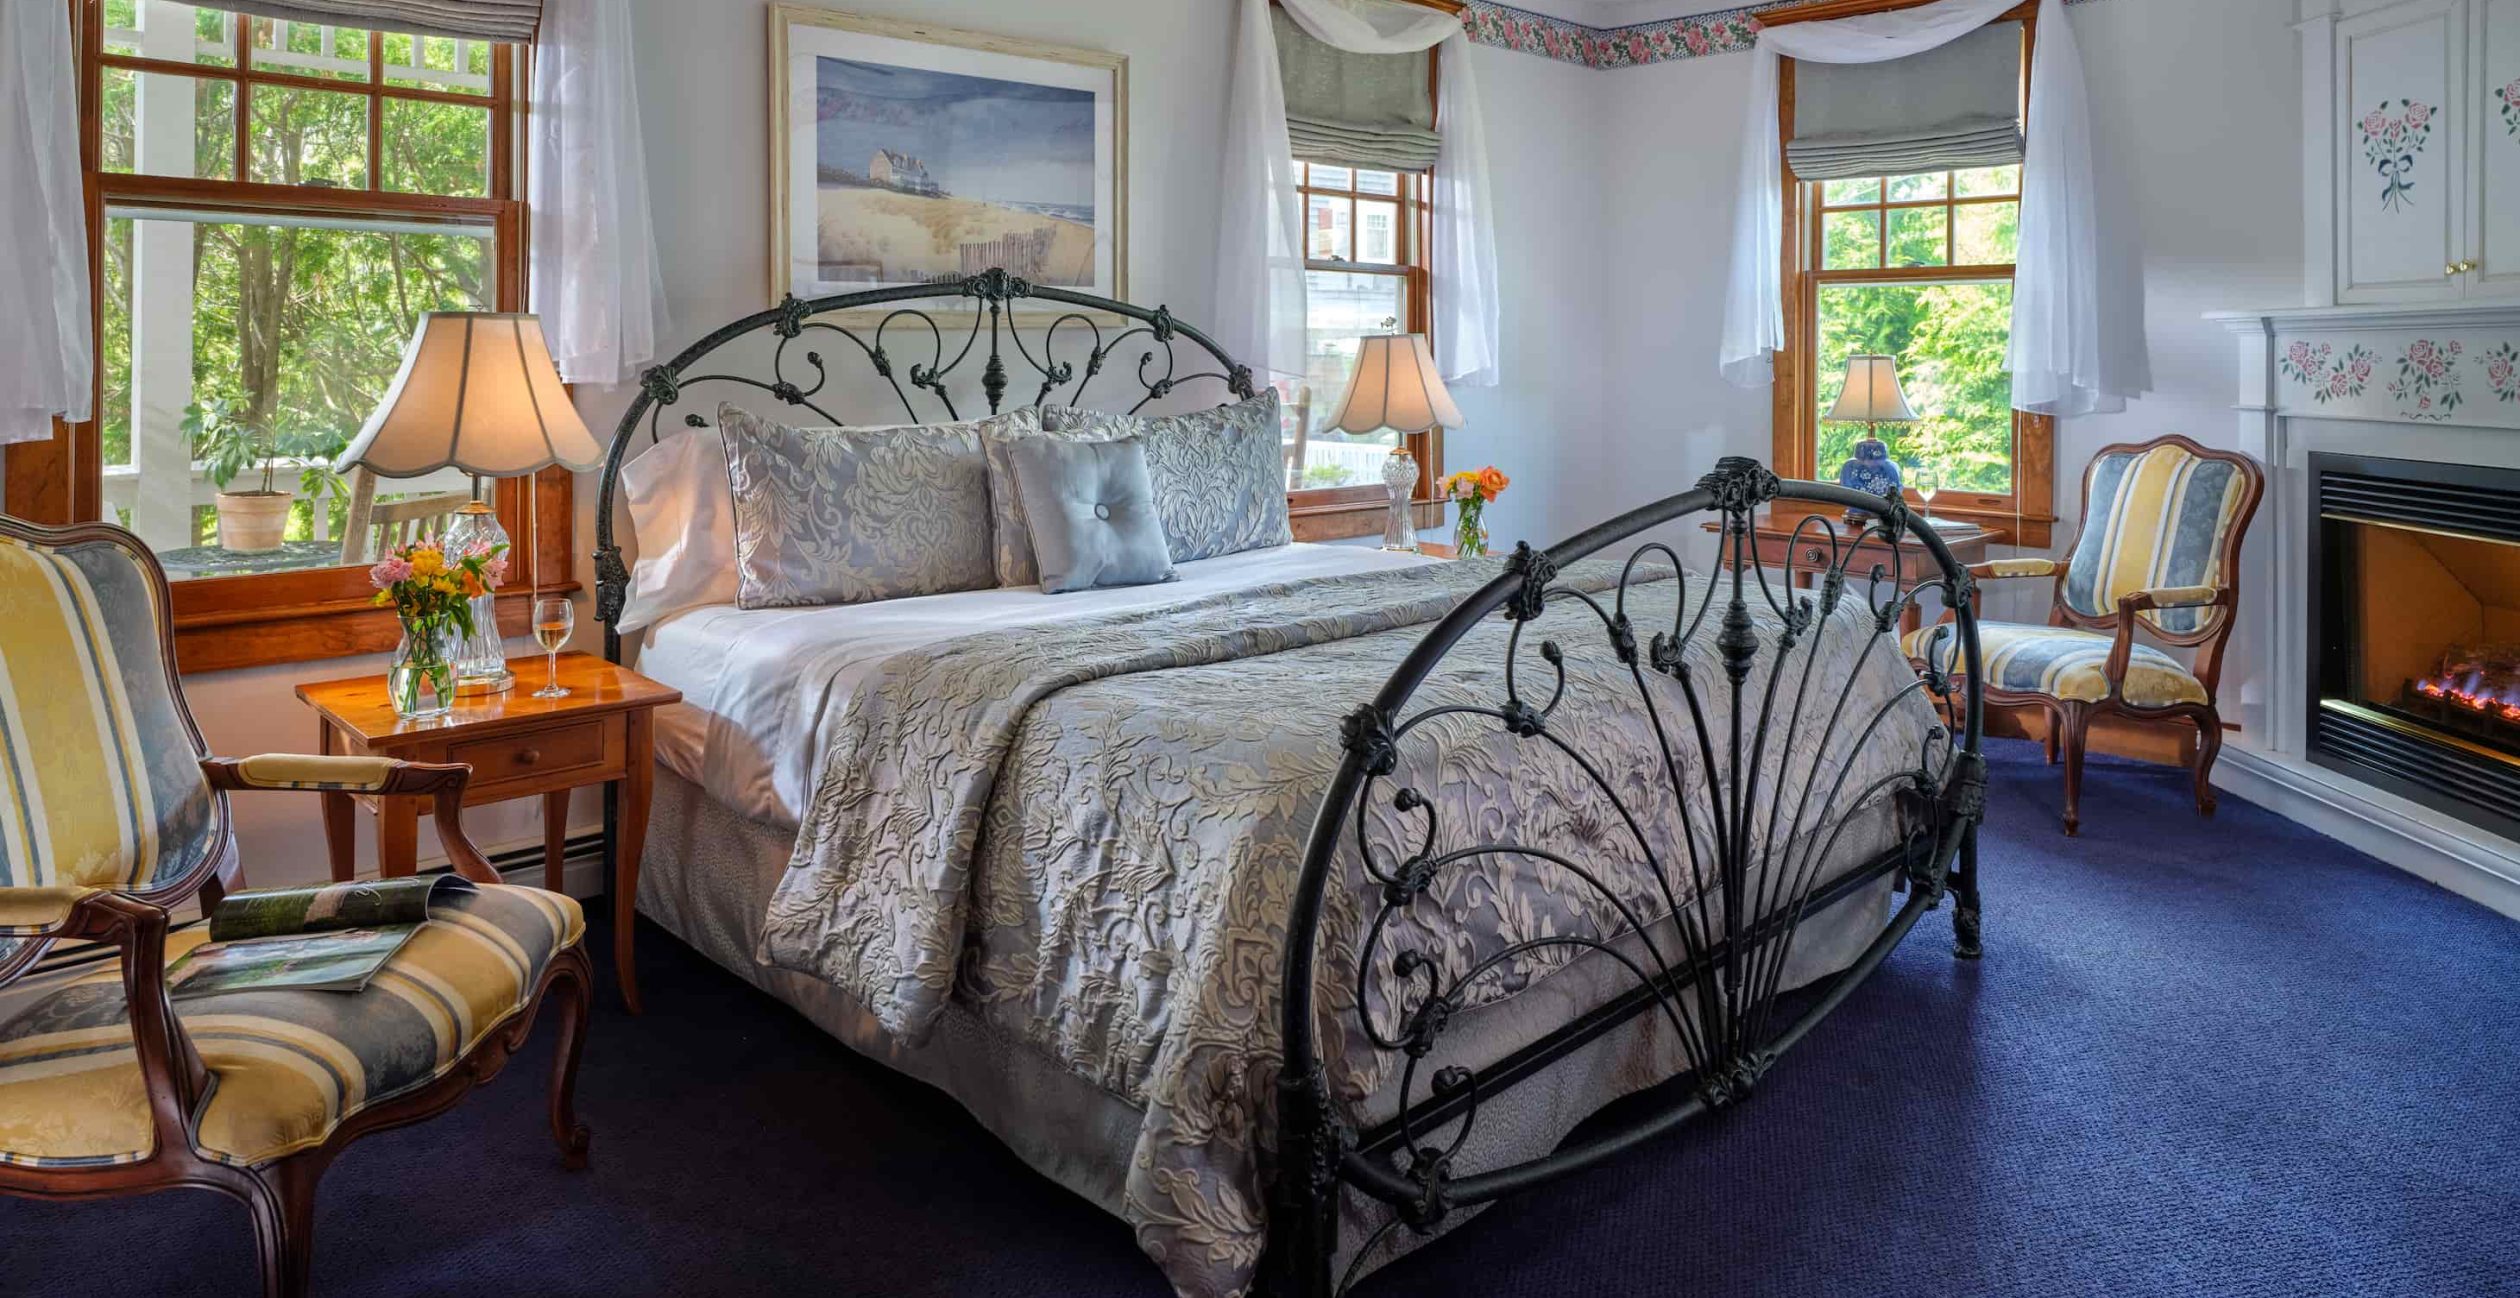 Harriet Beecher Stowe Room bed at Cape Cod boutique hotel